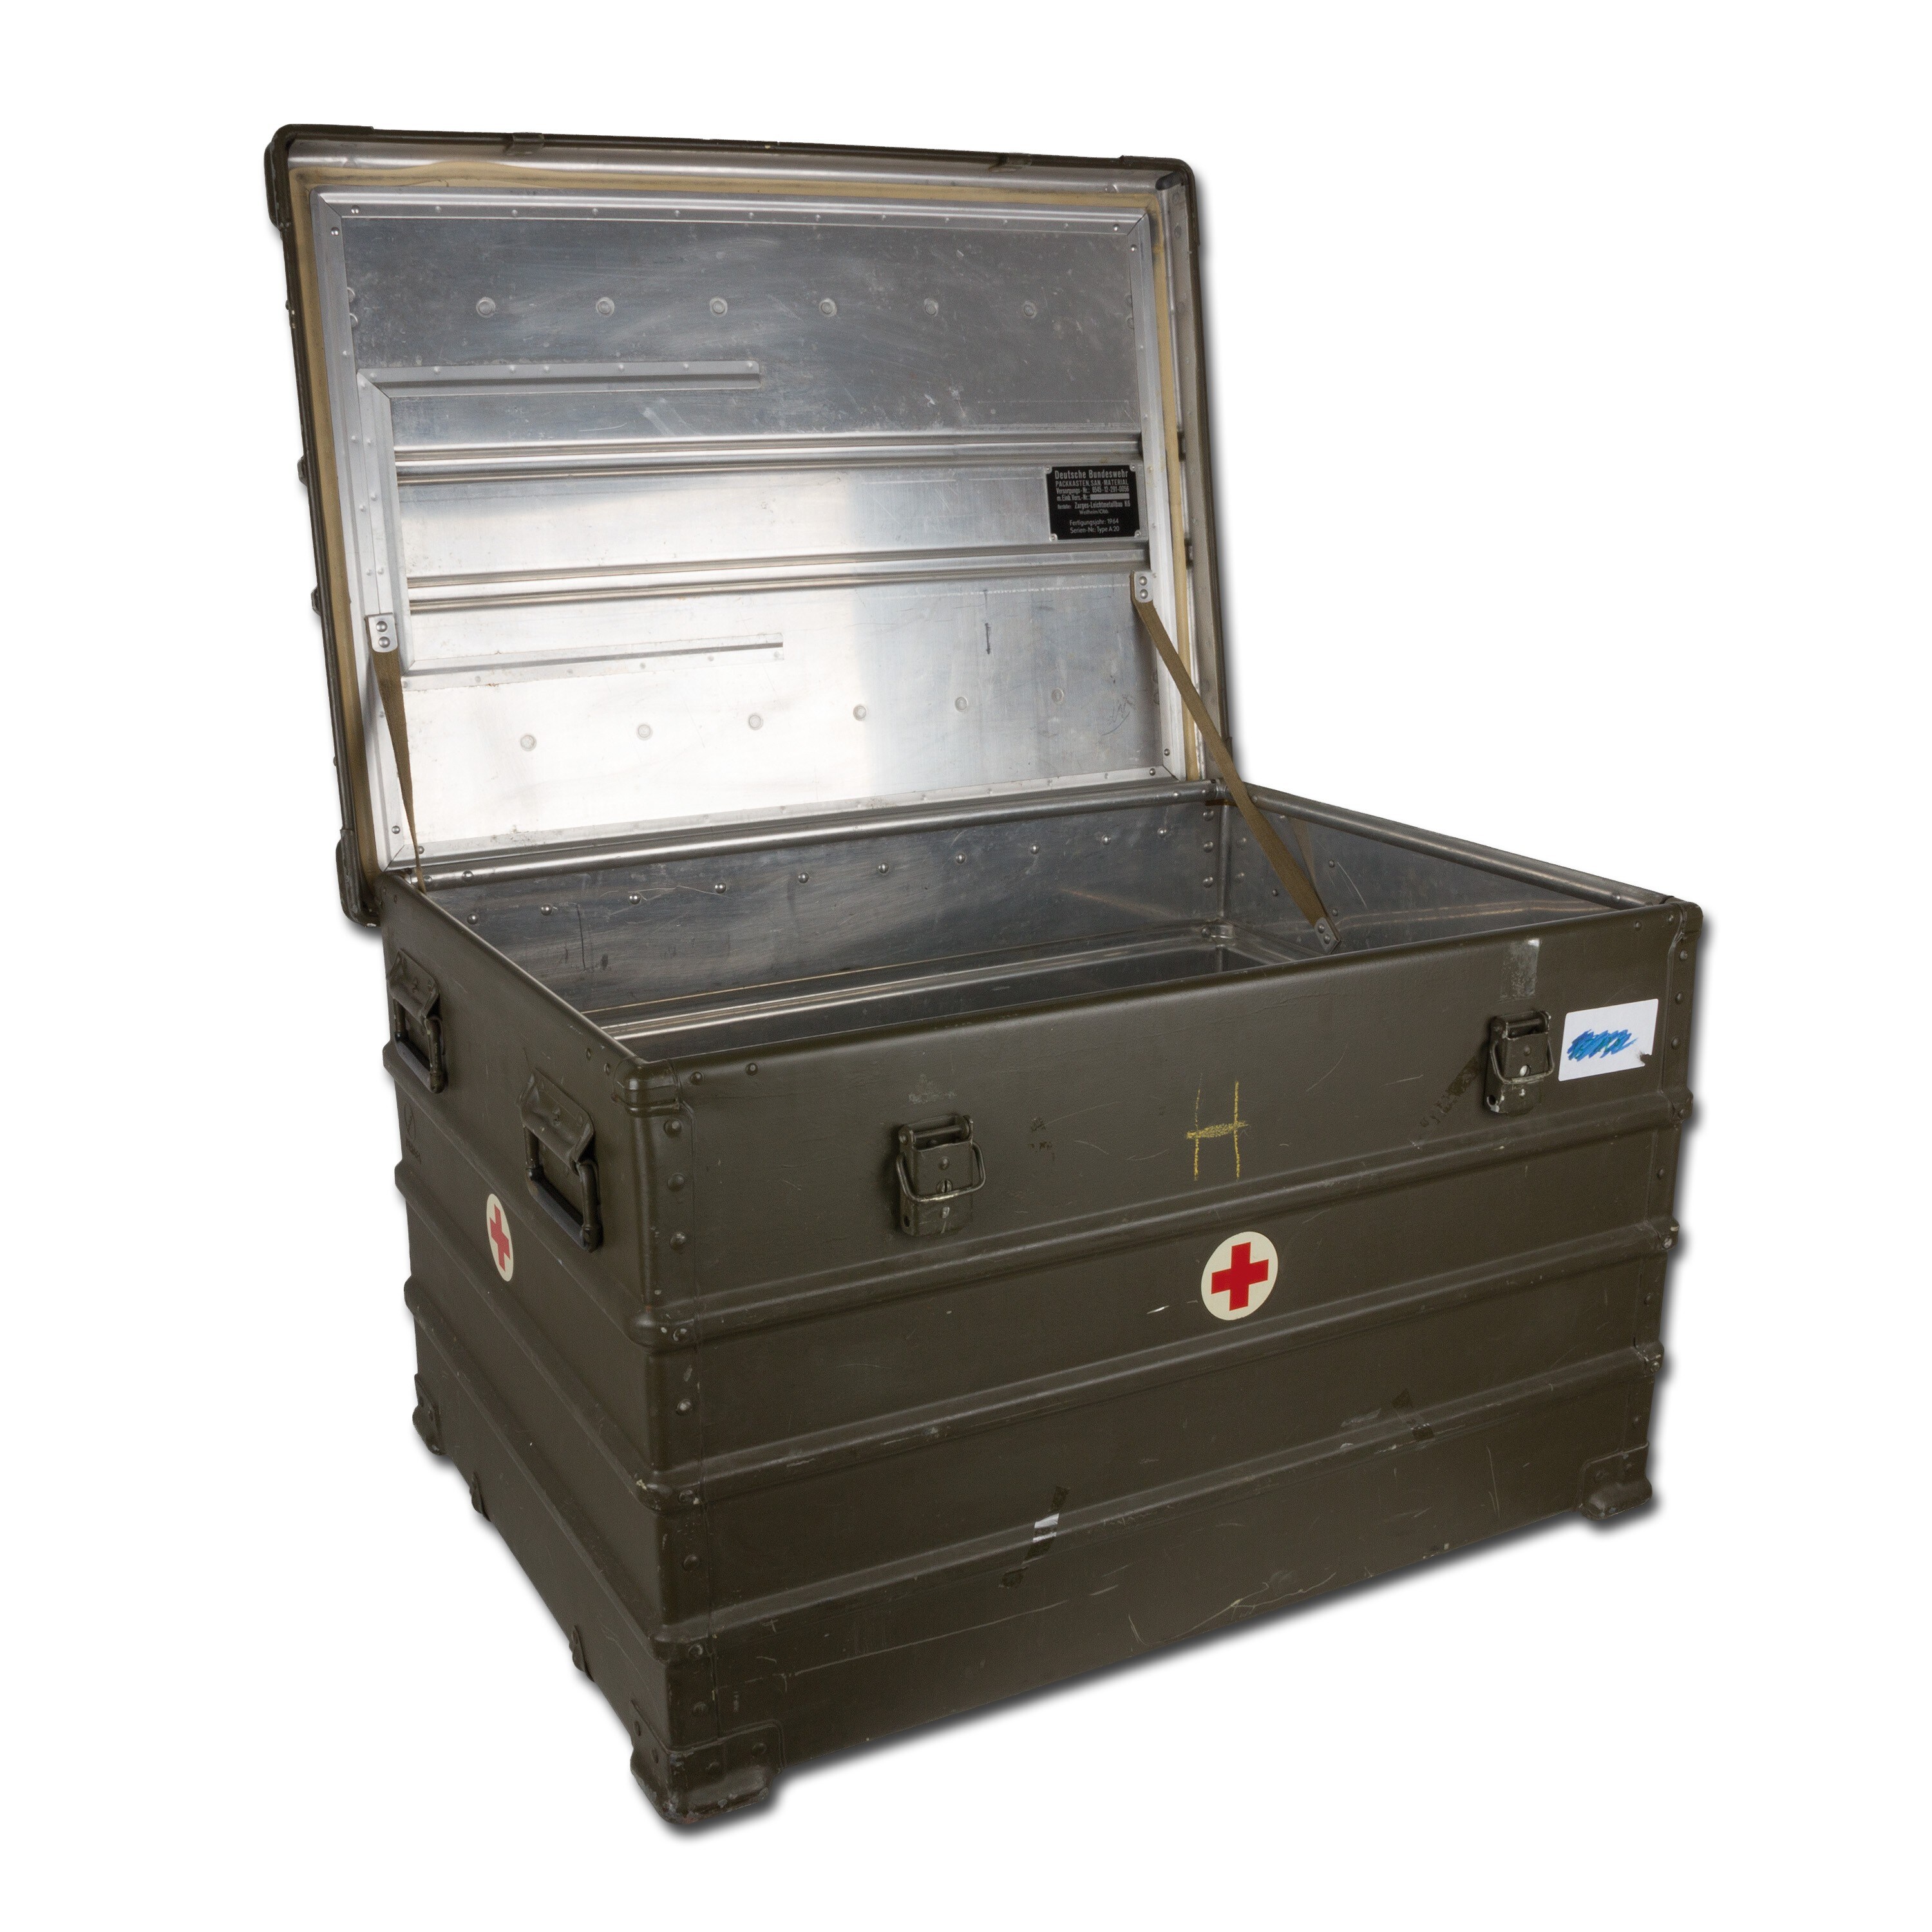 Zarges a20 // Cabinet // Box // Box // DRAWER CABINET // Transport Crate 